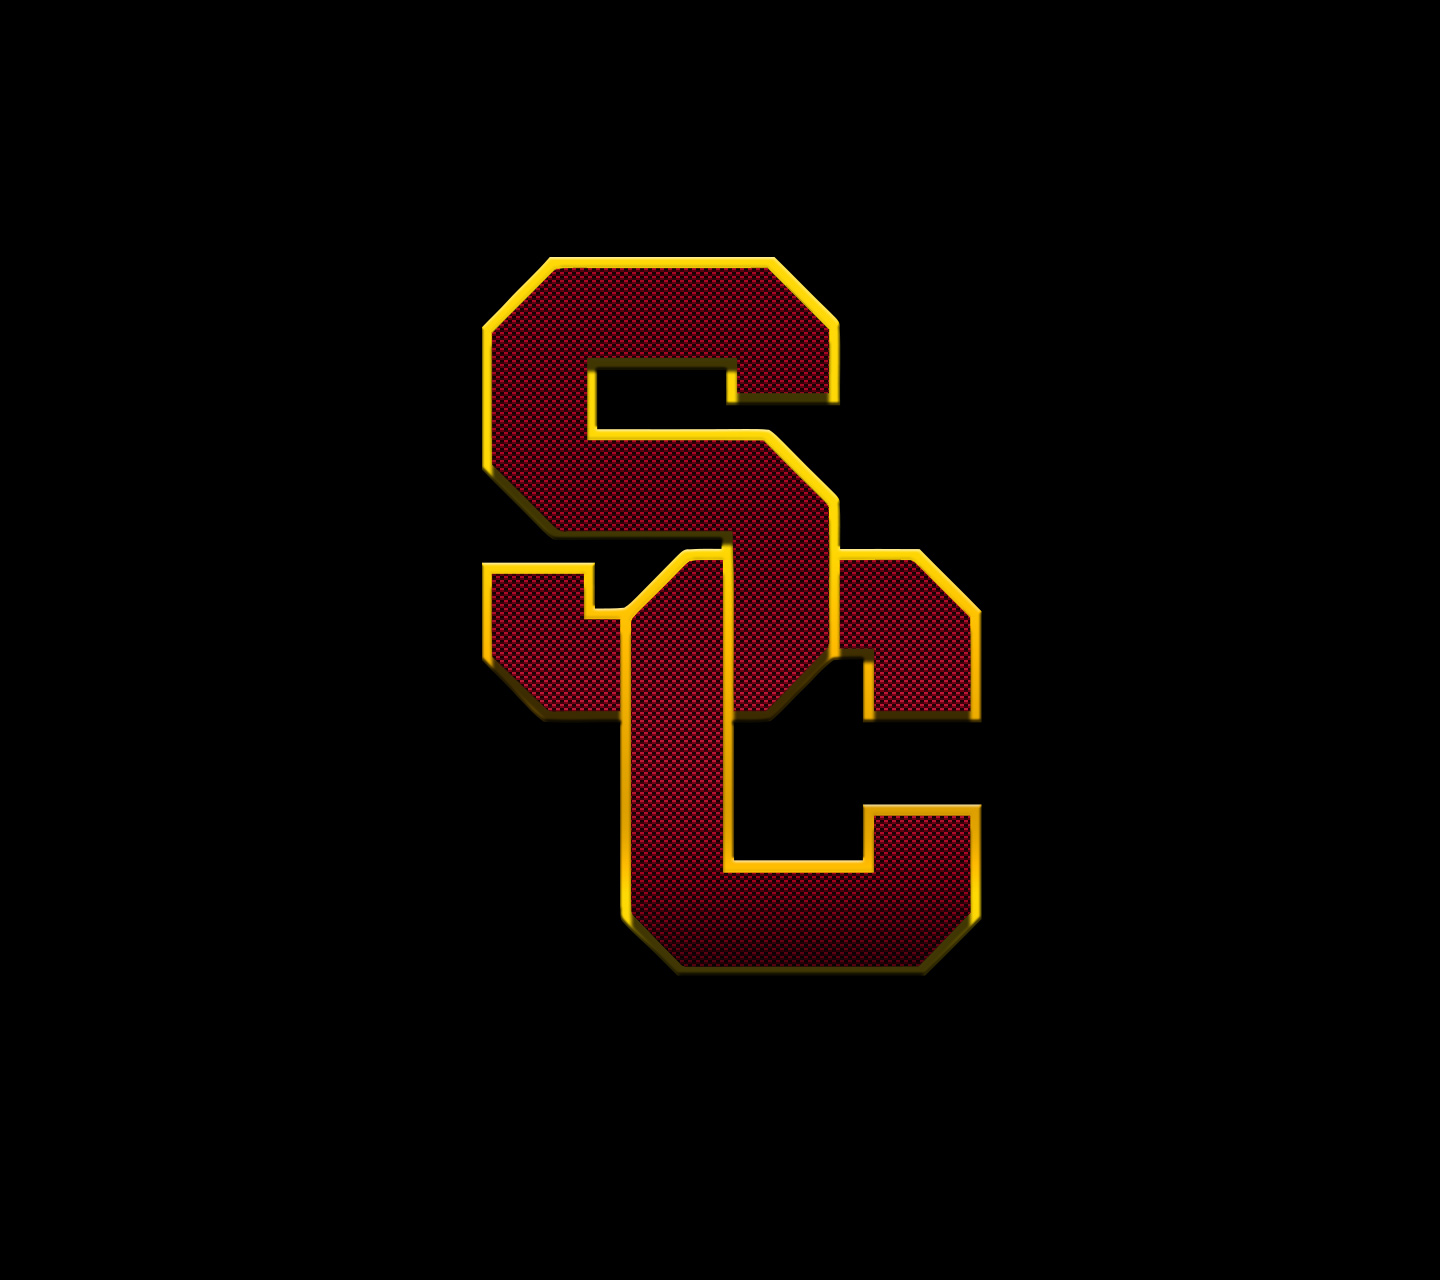 Usc Rugby University Of Southern California Football Club